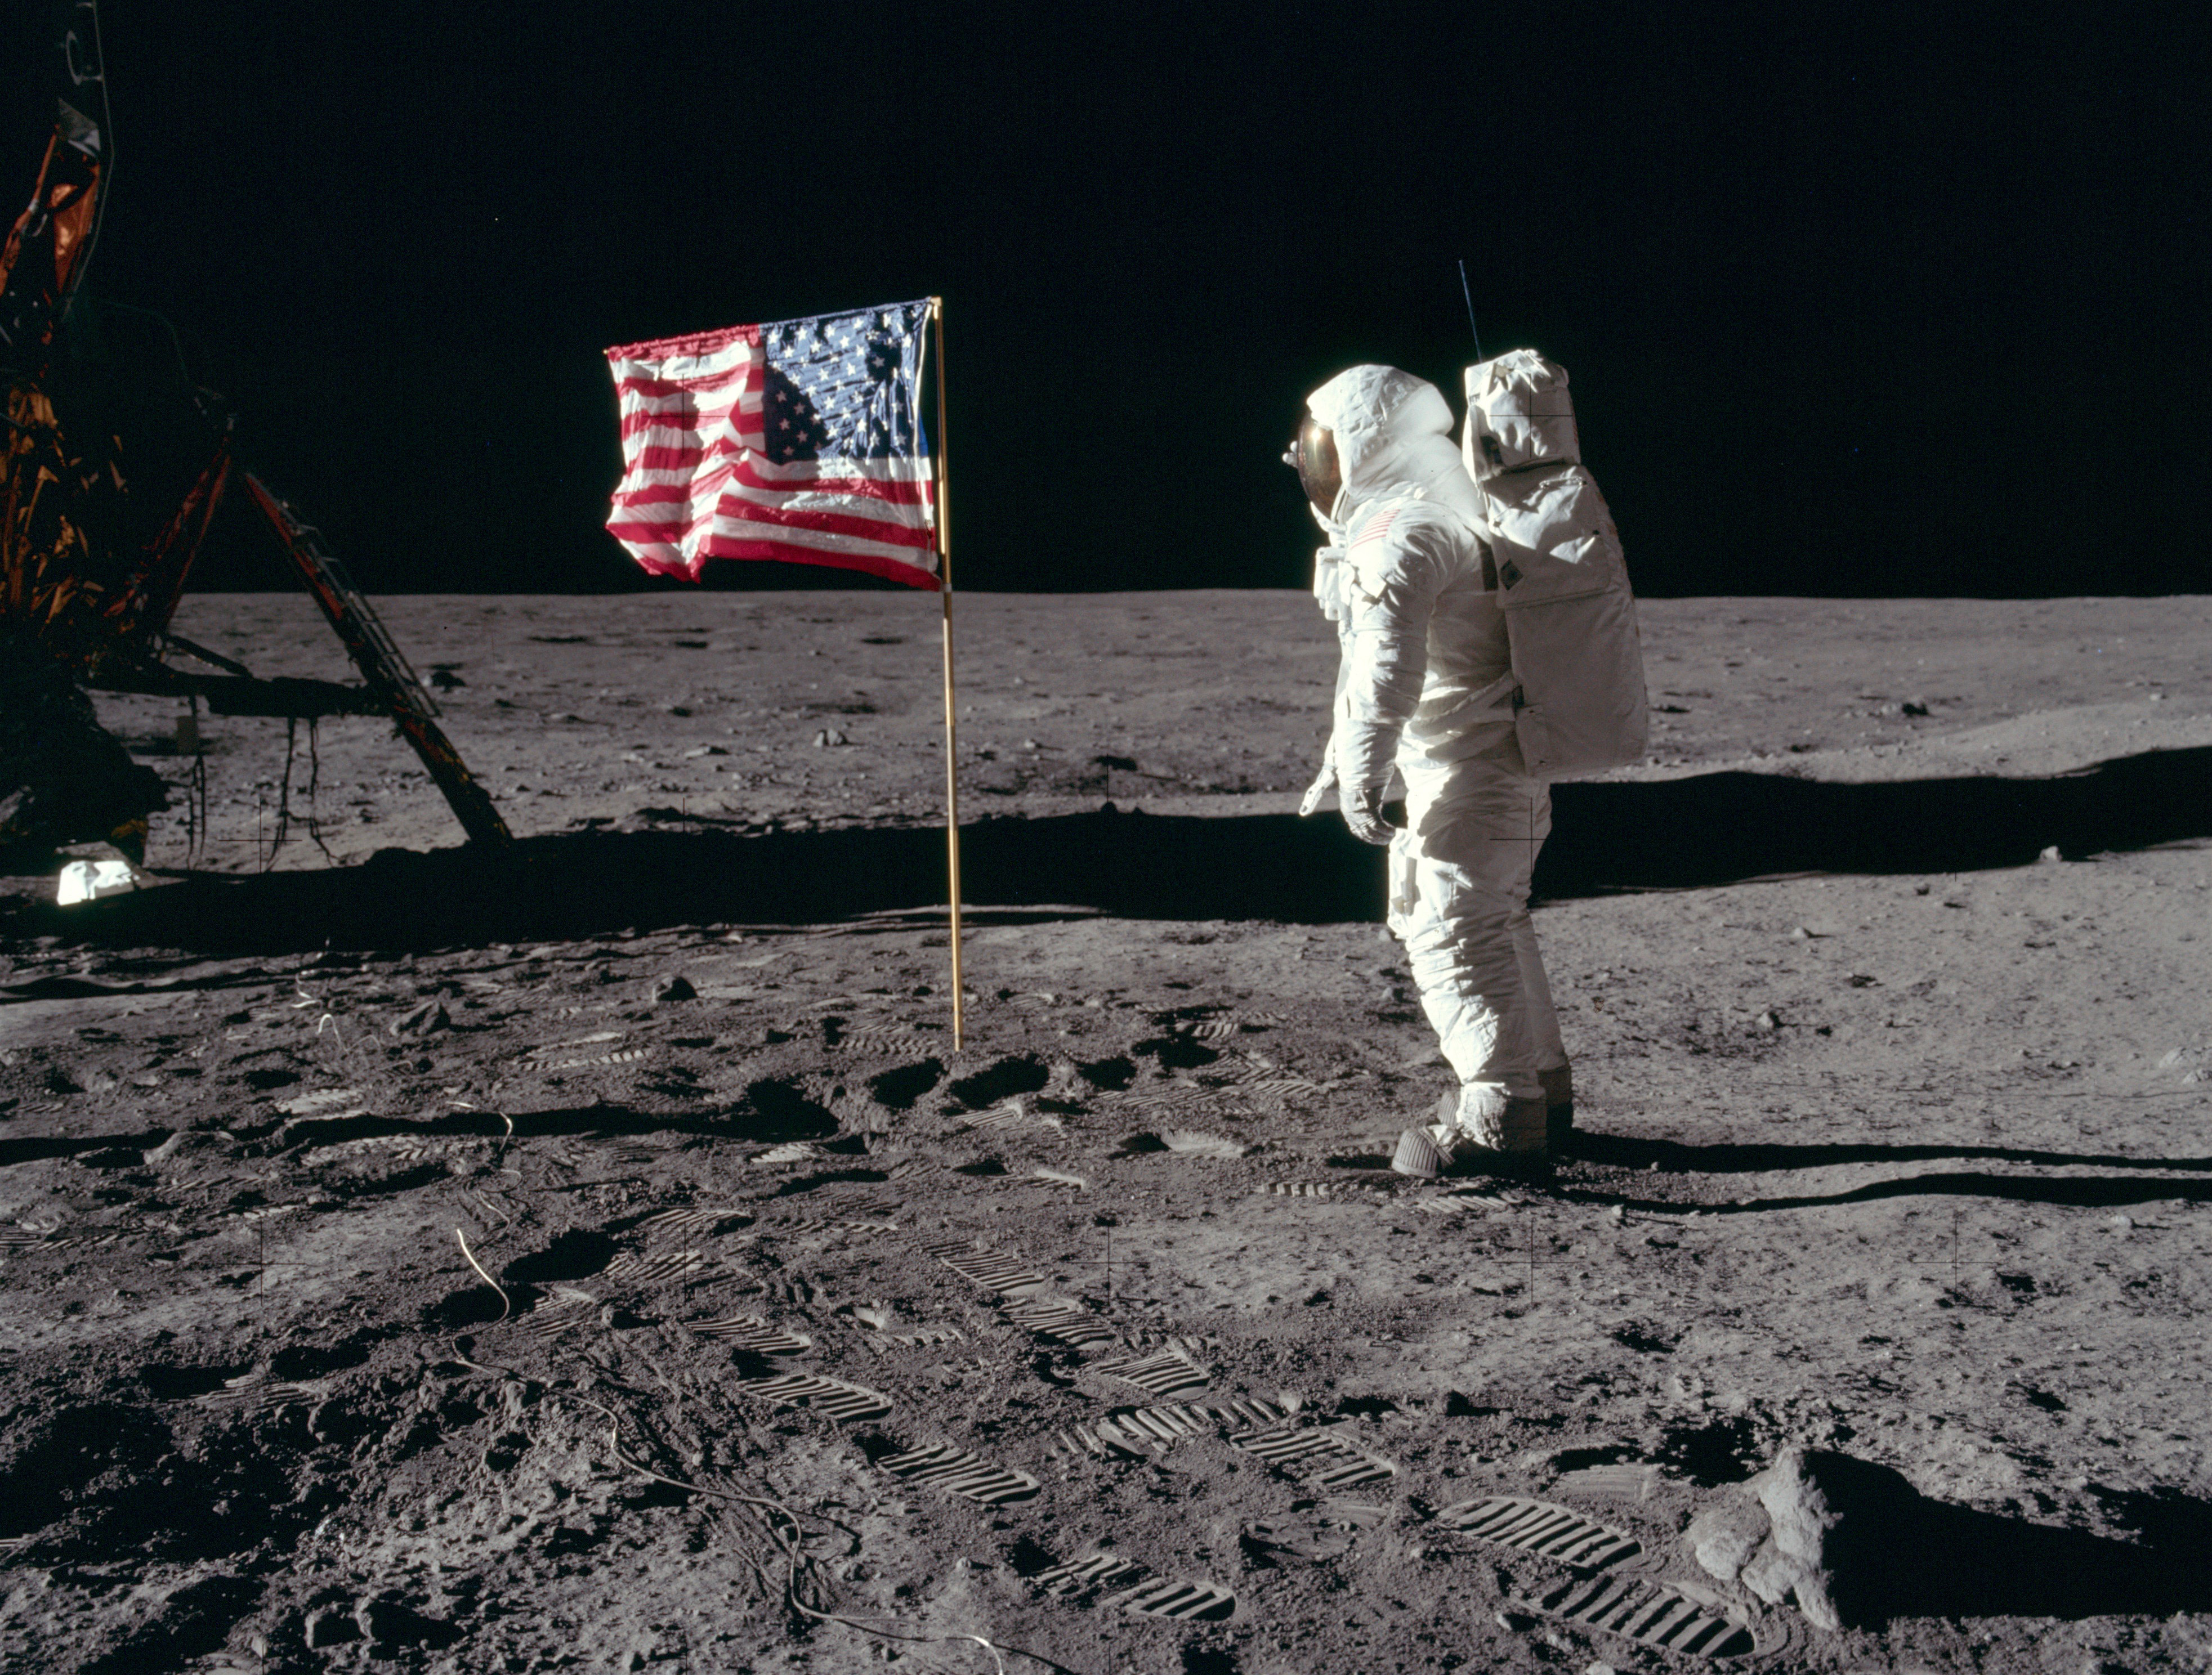 Buzz Aldrin salutes the first American flag erected on the Moon, July 21, 1969. Credit: NASA.